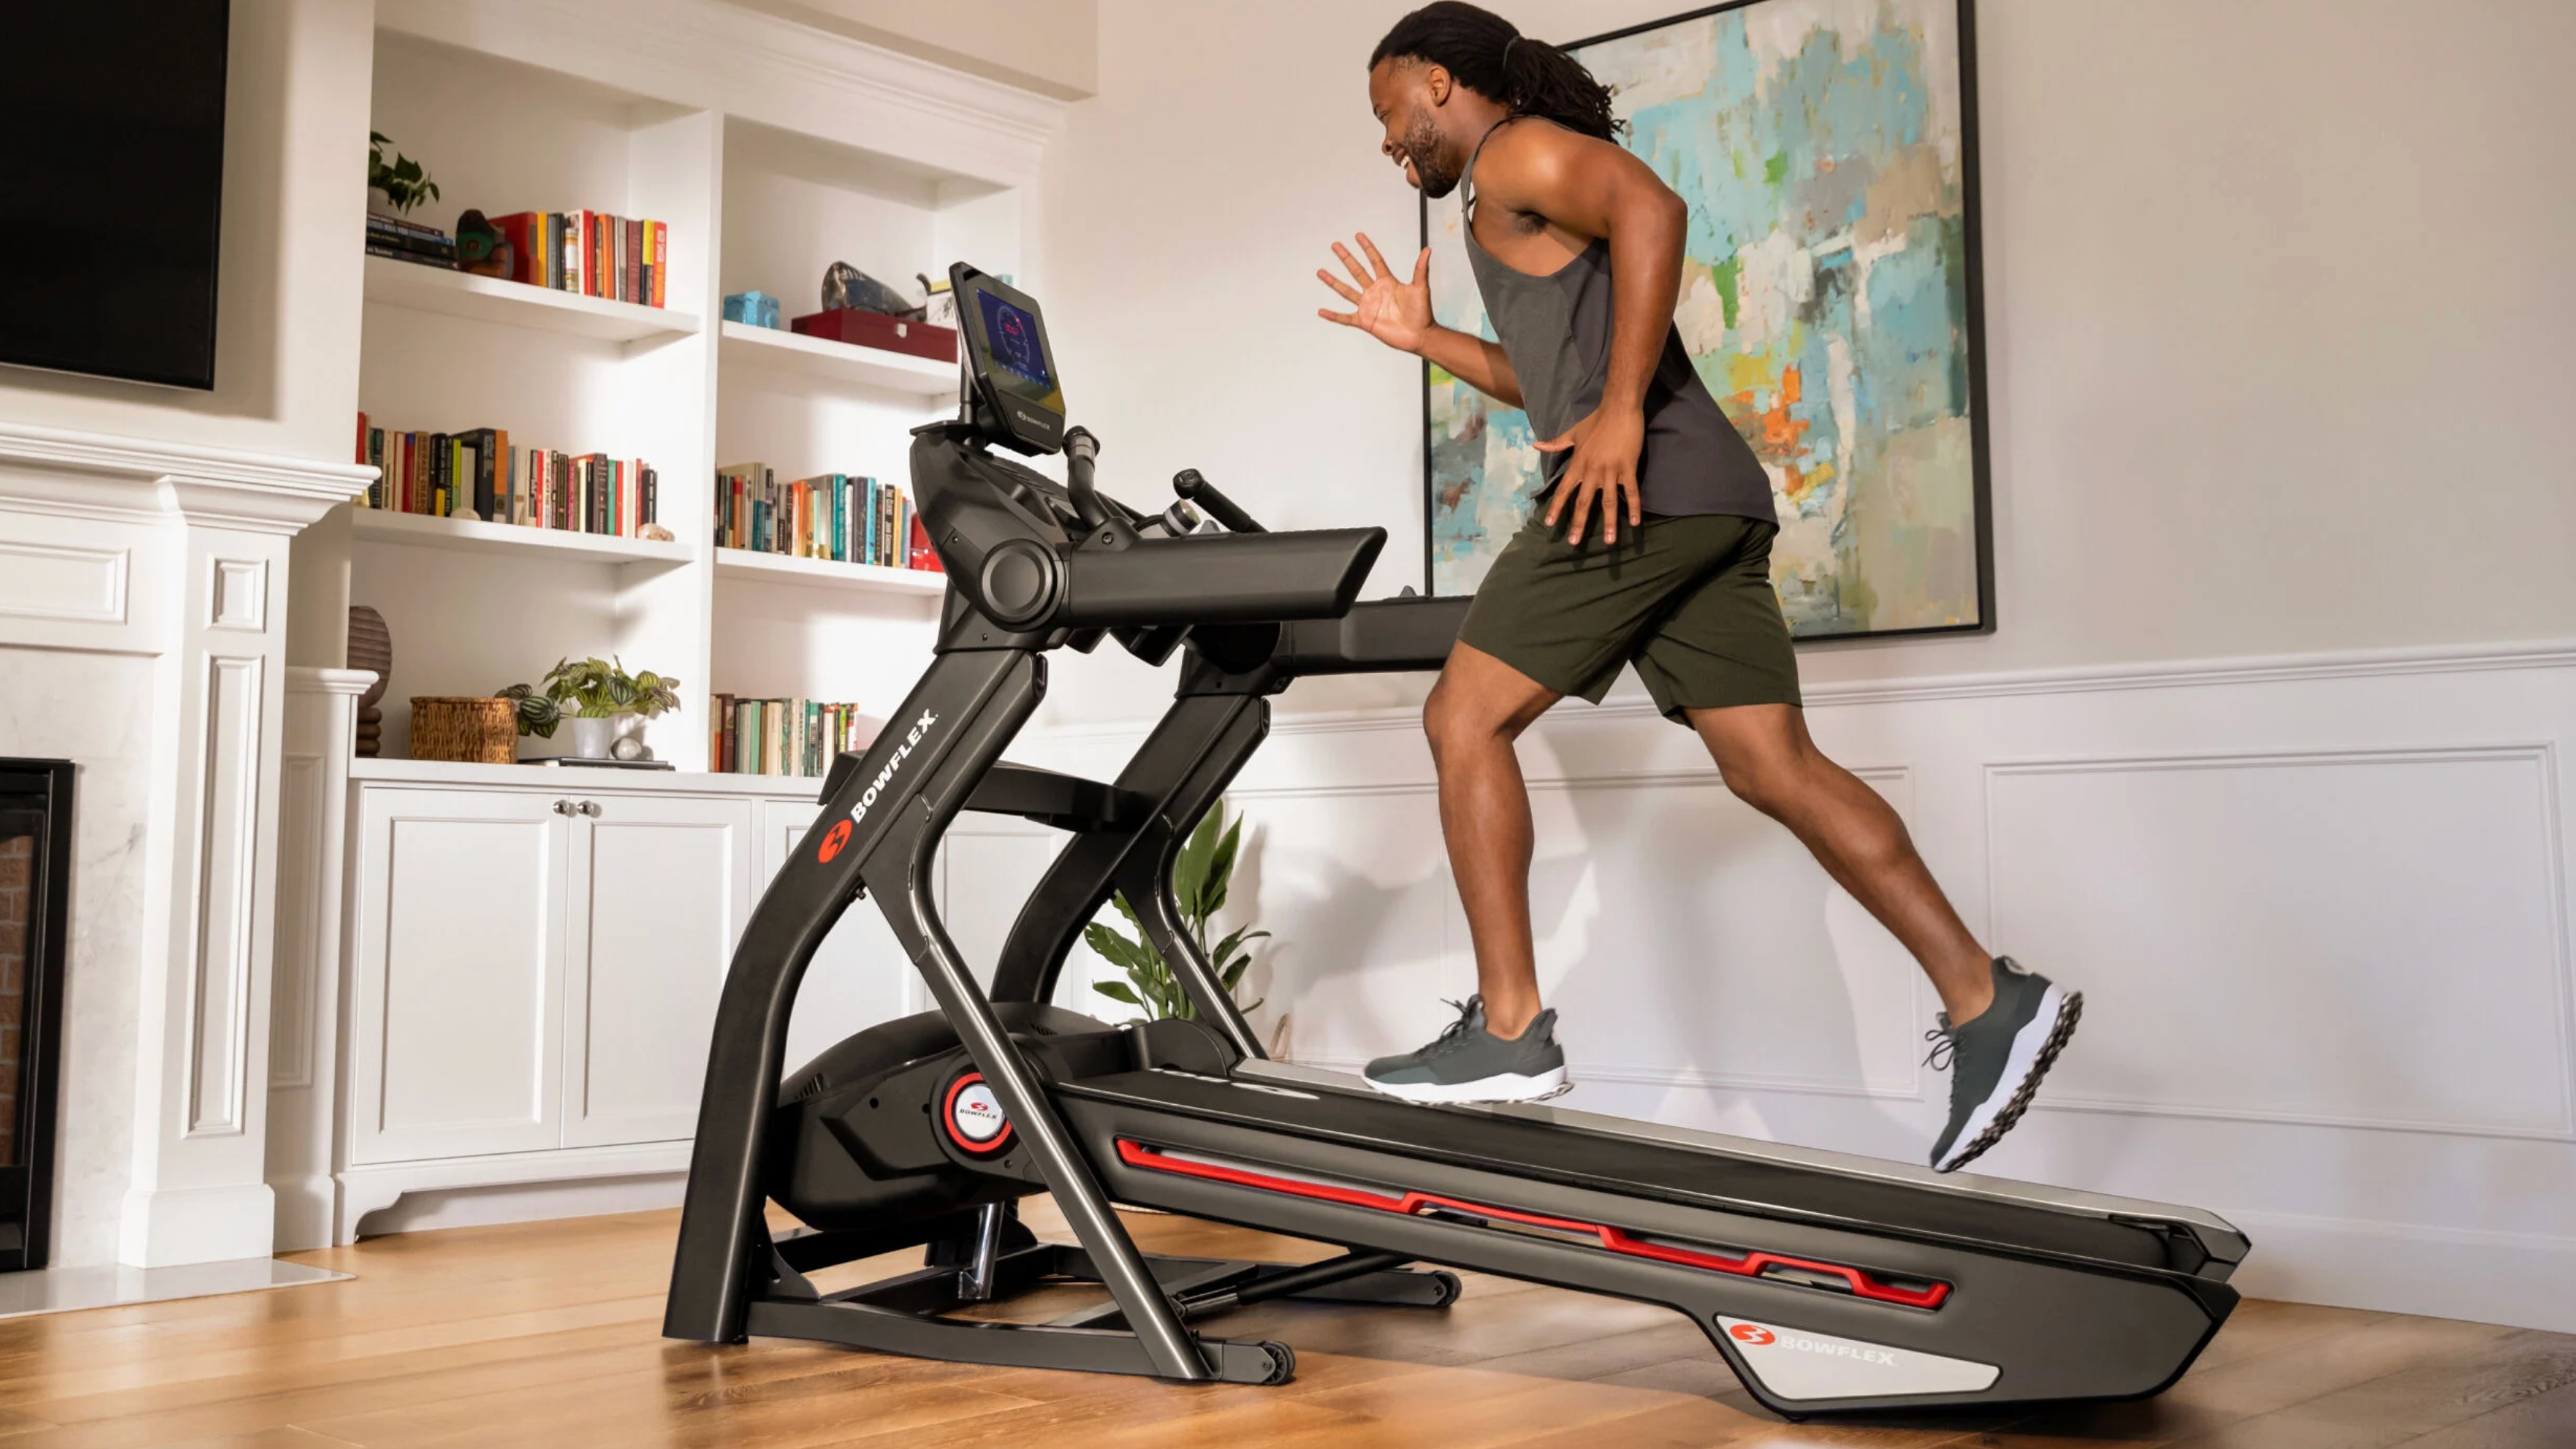 Save $1,300 on the Bowflex Treadmill 10 with this huge Black